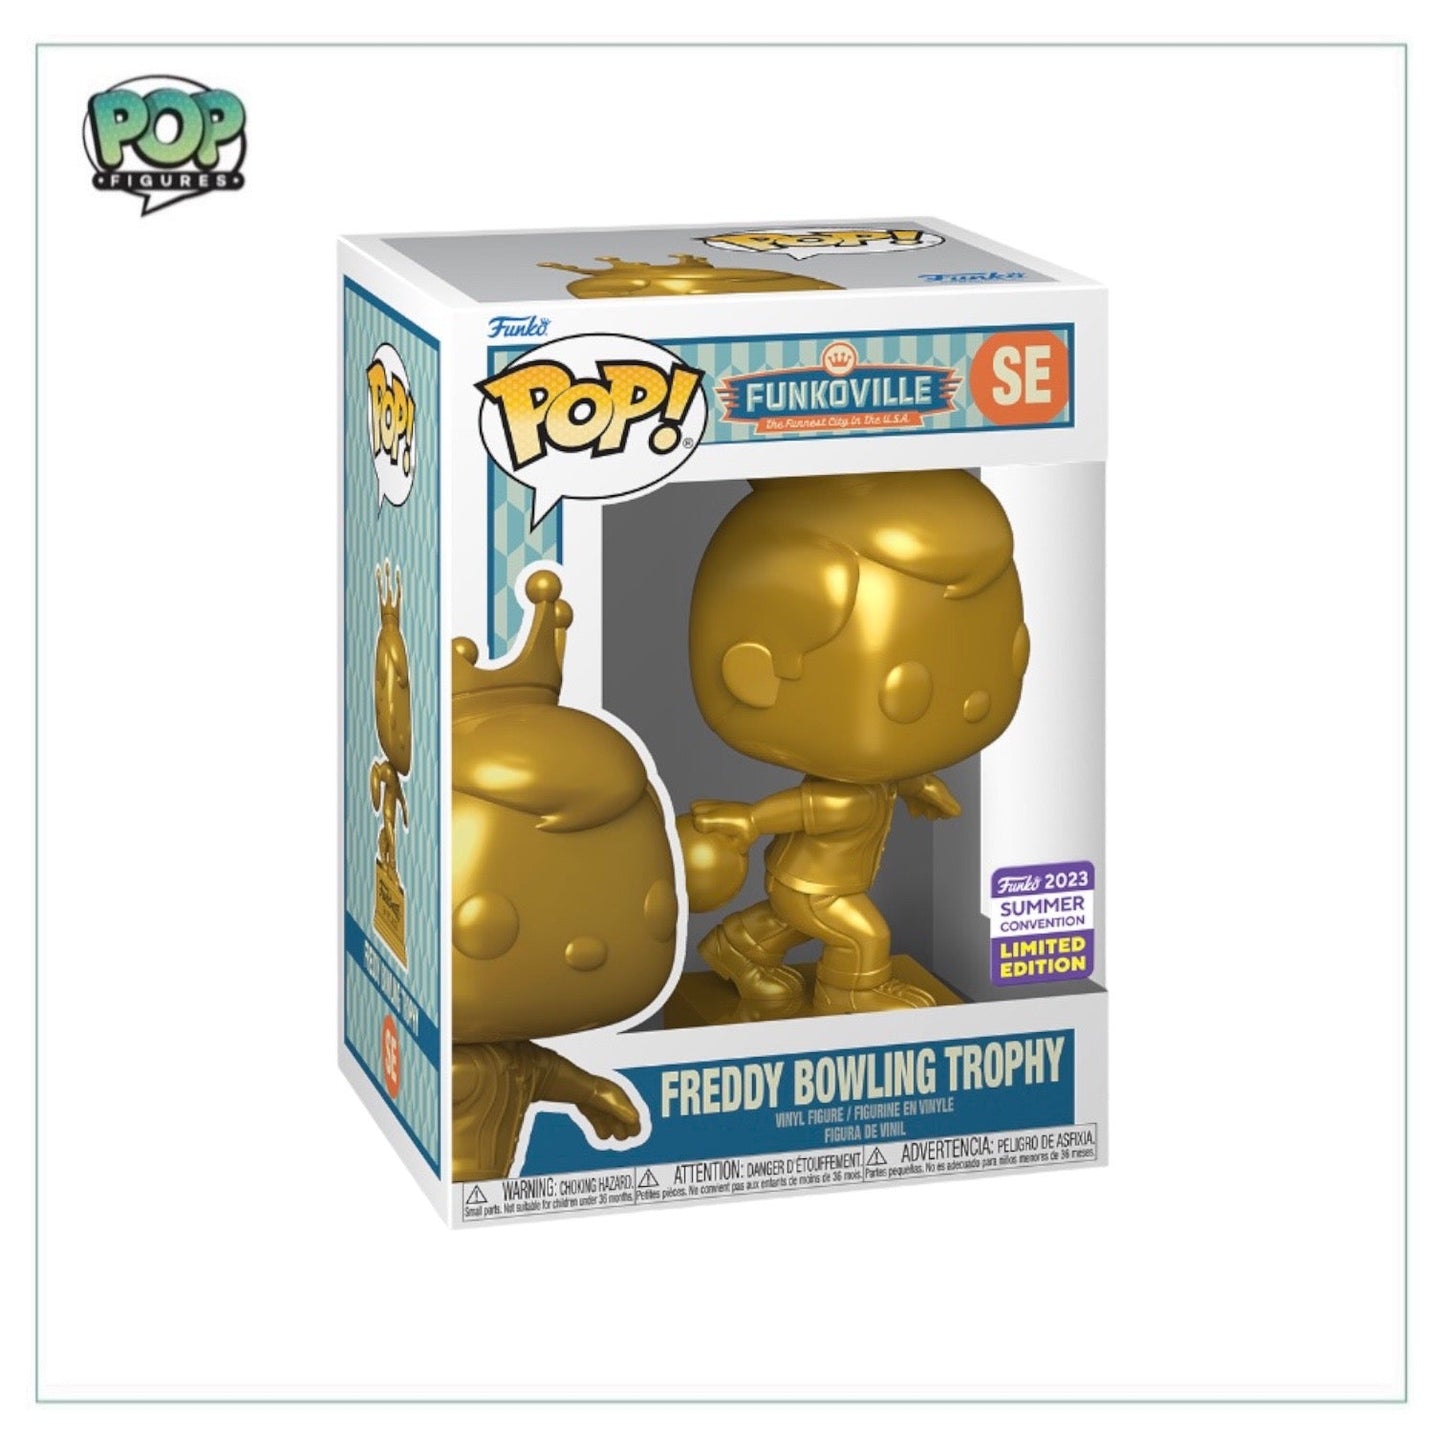 Freddy Bowling Trophy Funko Pop! - Funkoville - SDCC 2023 Shared Exclusive - Angry Cat